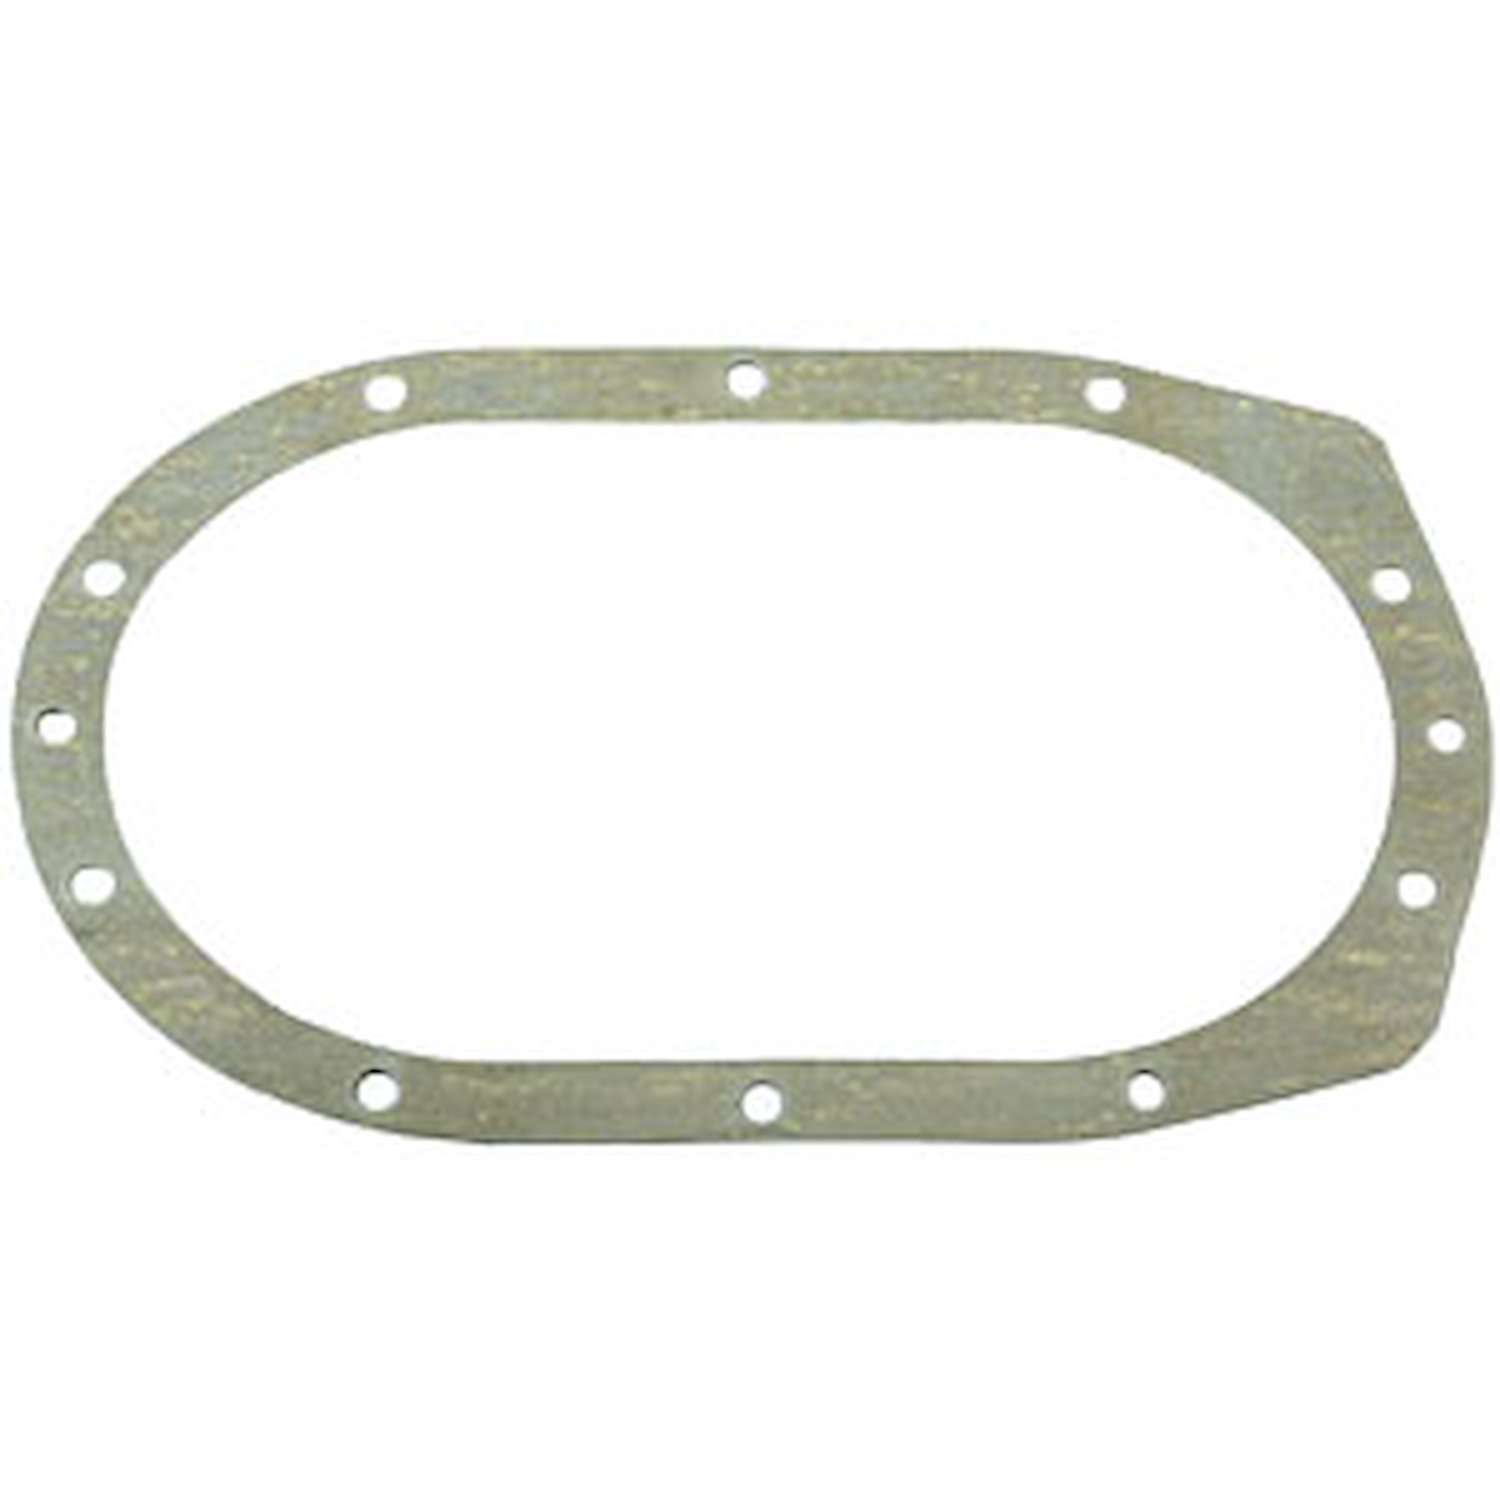 Front Gear Cover to Supercharger Gasket 6-71 & 8-71 Series Superchargers